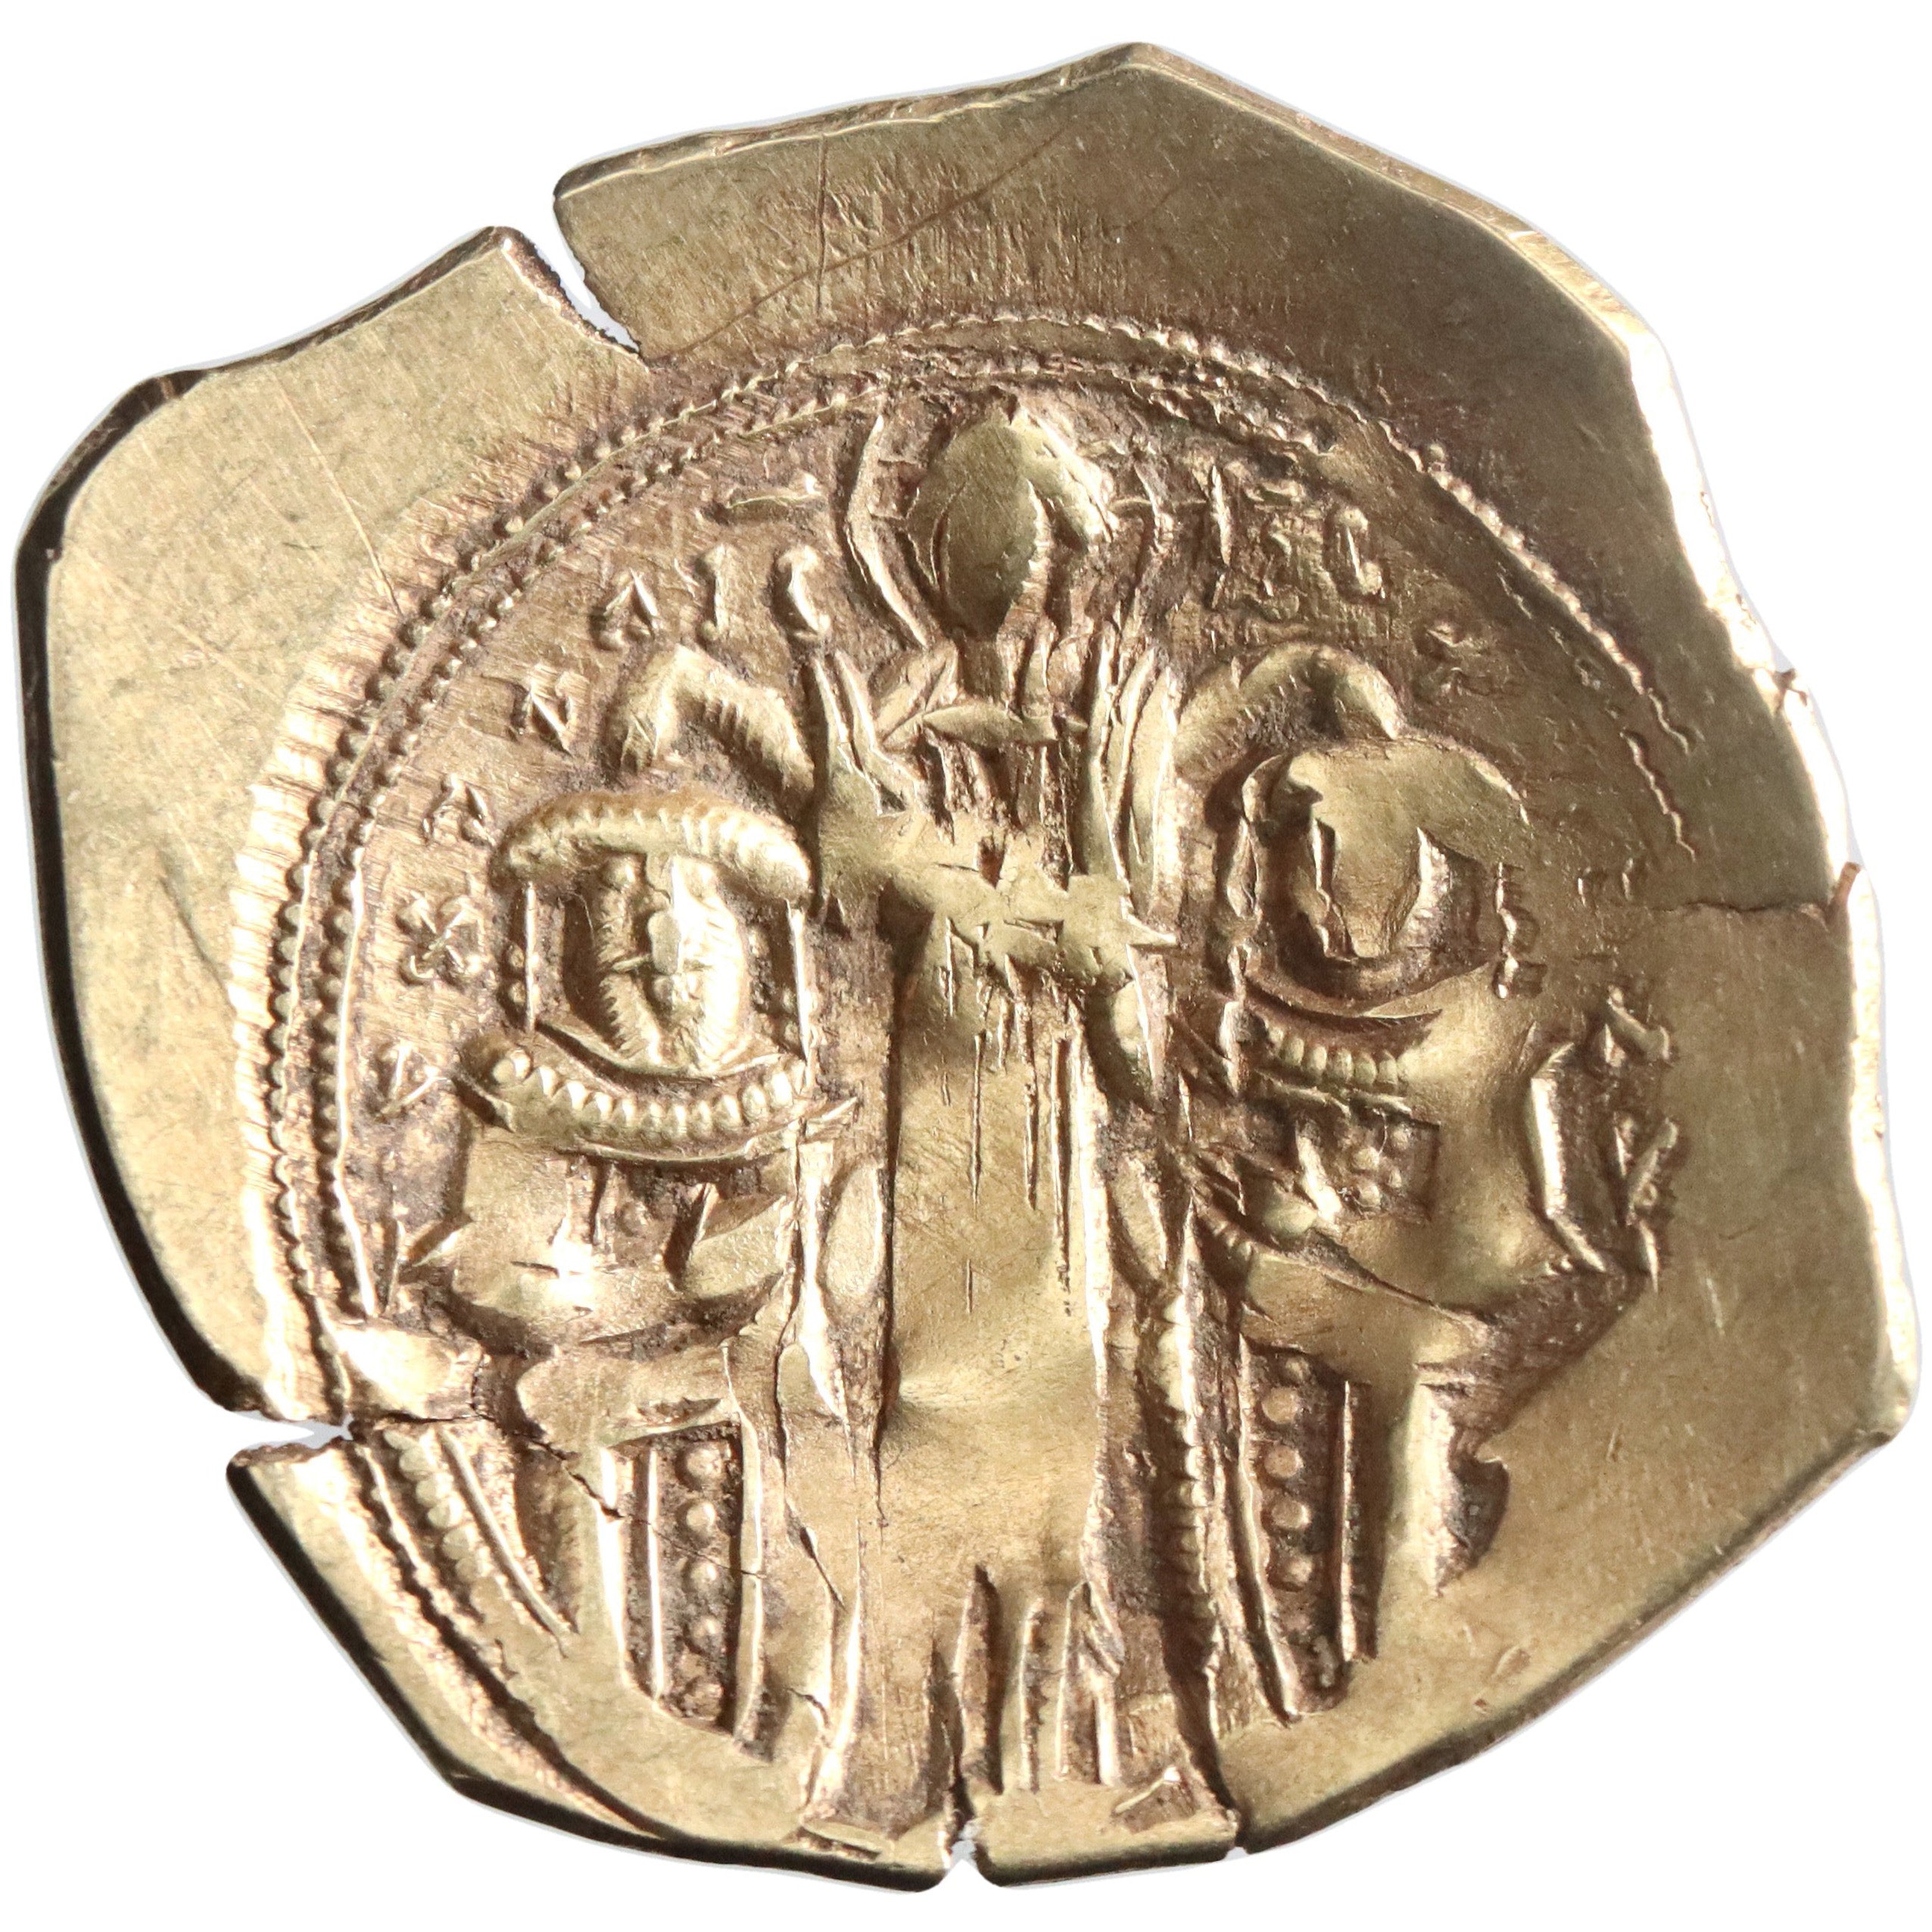 Byzantine, Andronicus II with Michael IX, gold/electrum hyperpyron, Constantinople mint, 1294-1320 CE, bust of orans Virgin Mary within walls of the city / Christ blessing Andronicus II and Michael IX